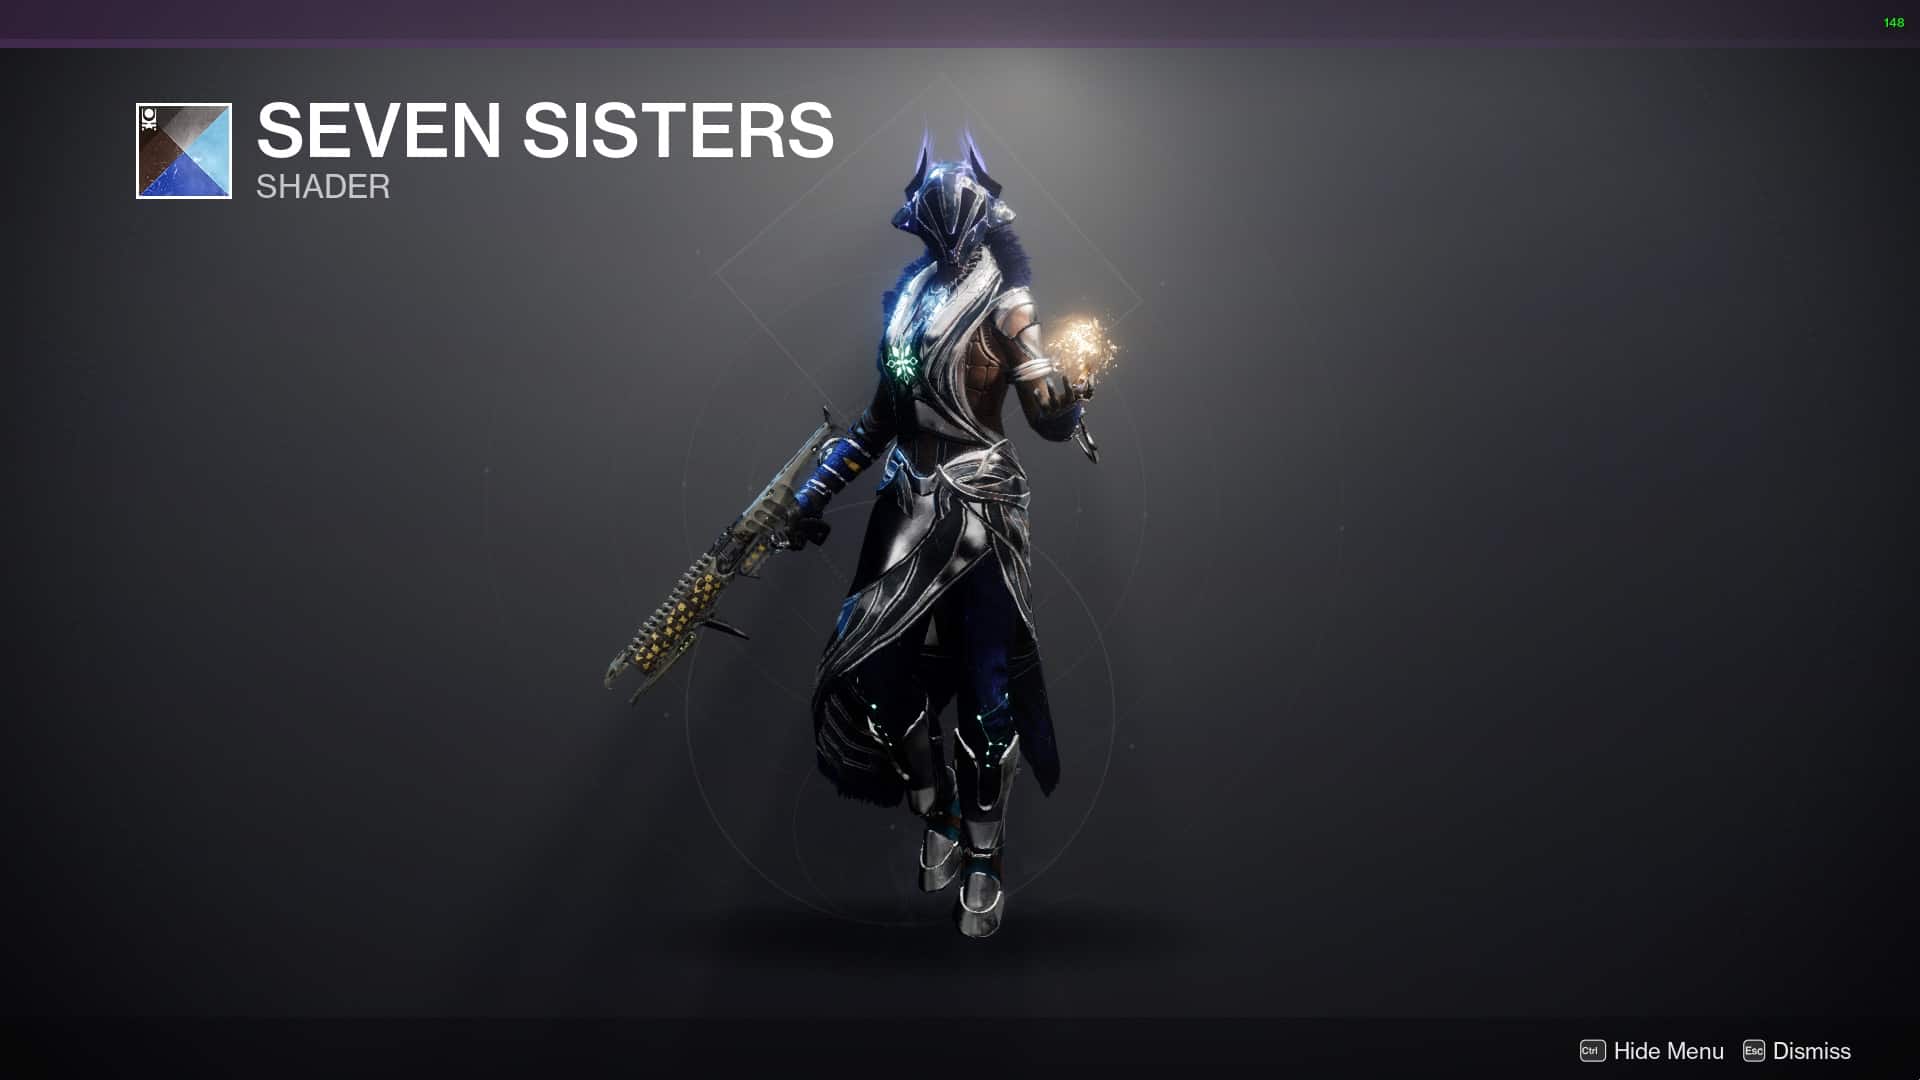 Seven Sisters Shader featured